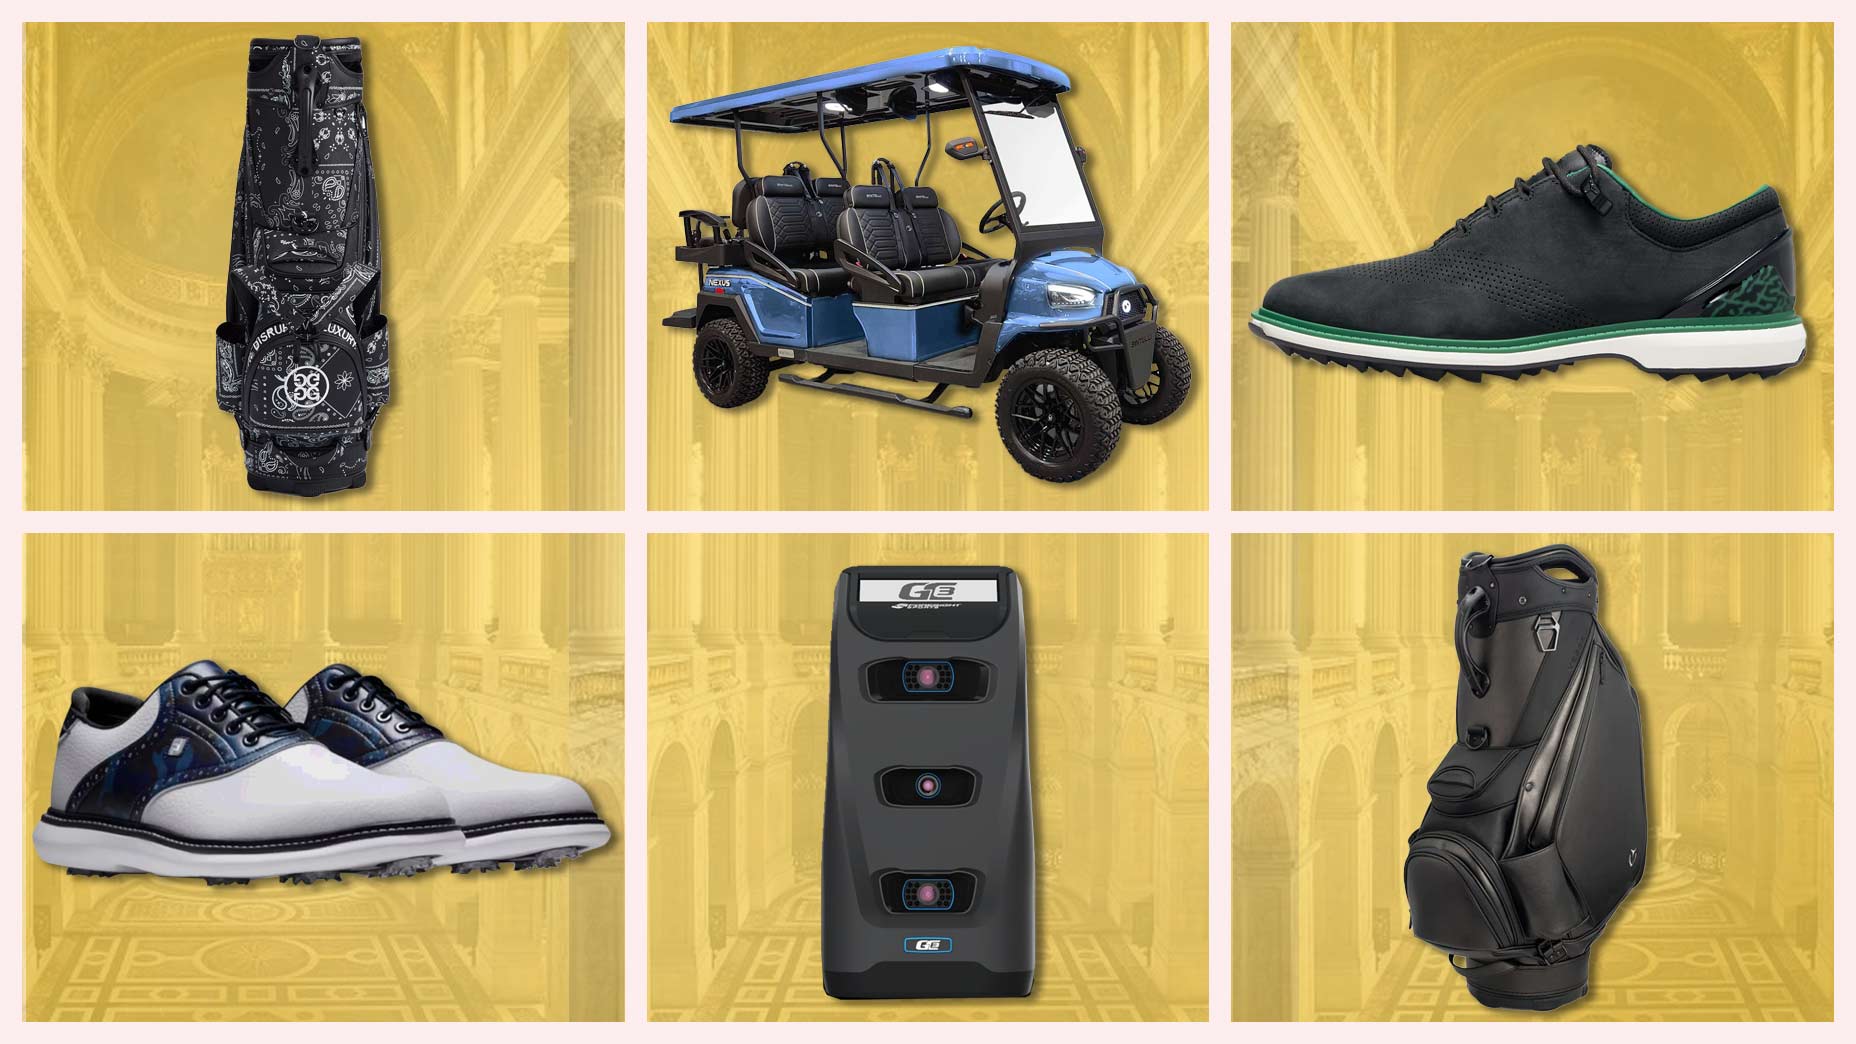 Luxury is subjective by personal taste. Some find luxury in style and comfort, others in dollar value. Tap to shop this lavish list of golf luxuries.